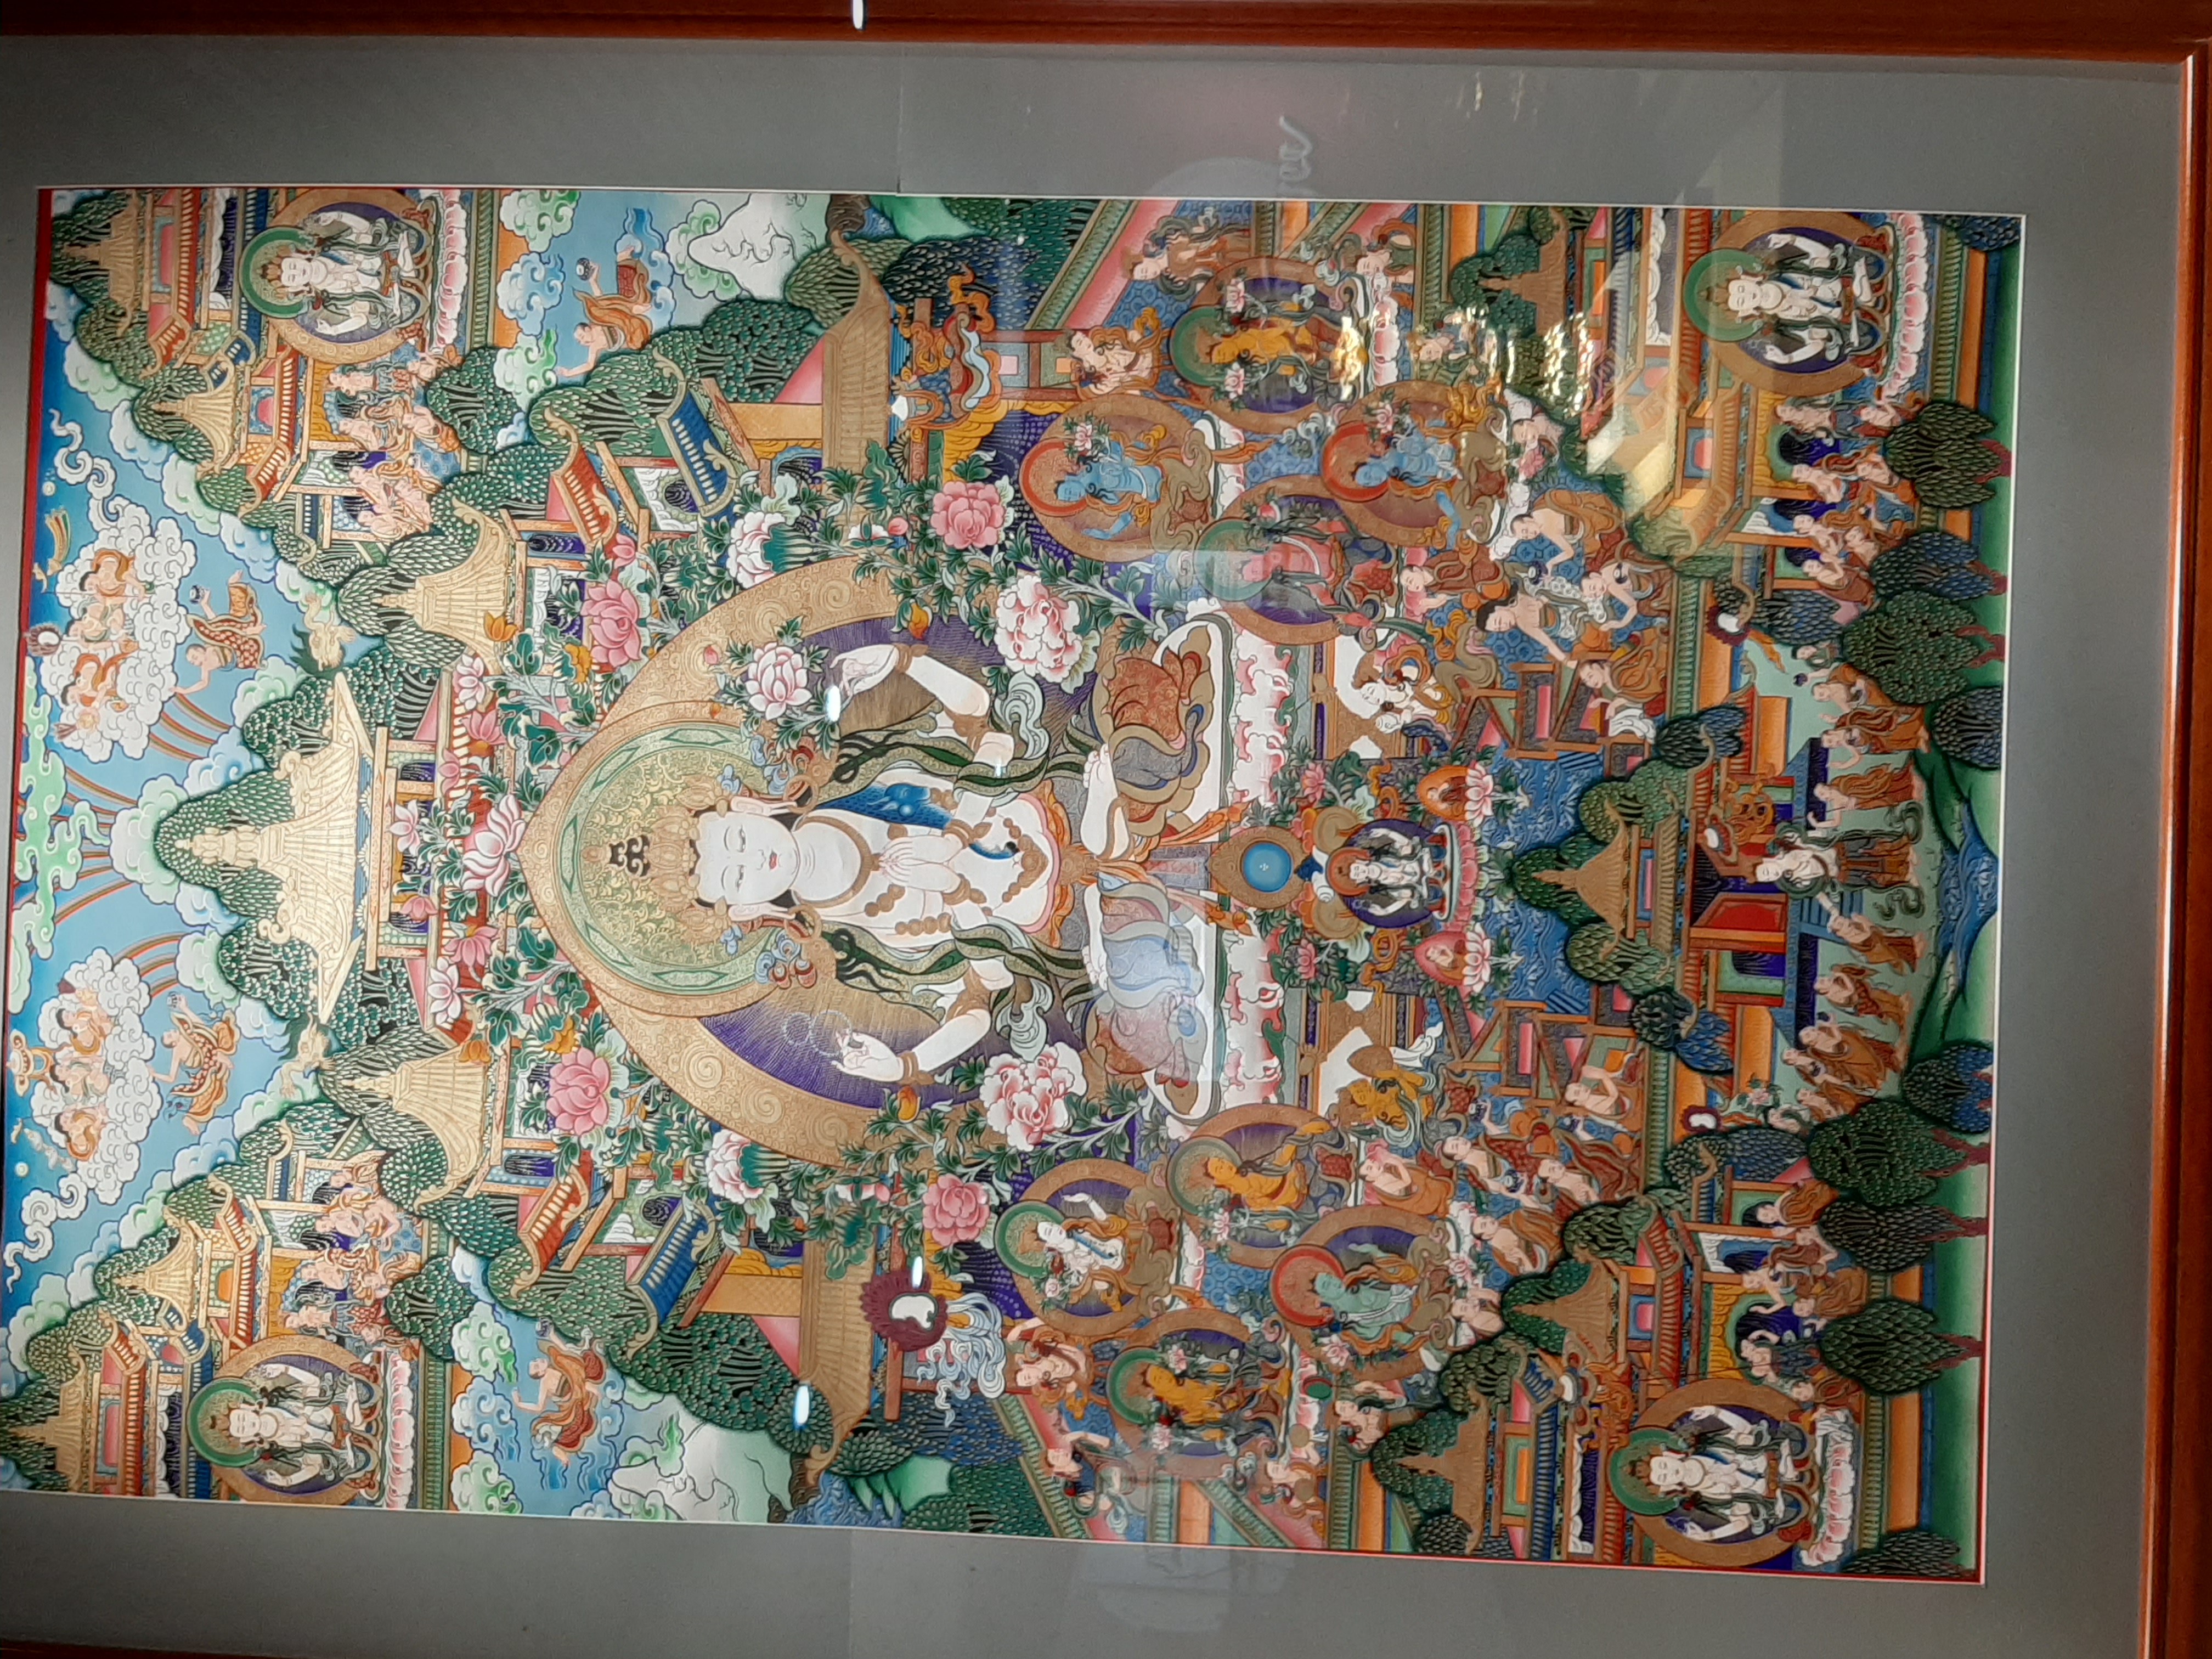 Tangkas - Traditionnal painting (Unesco Protected Heritage)